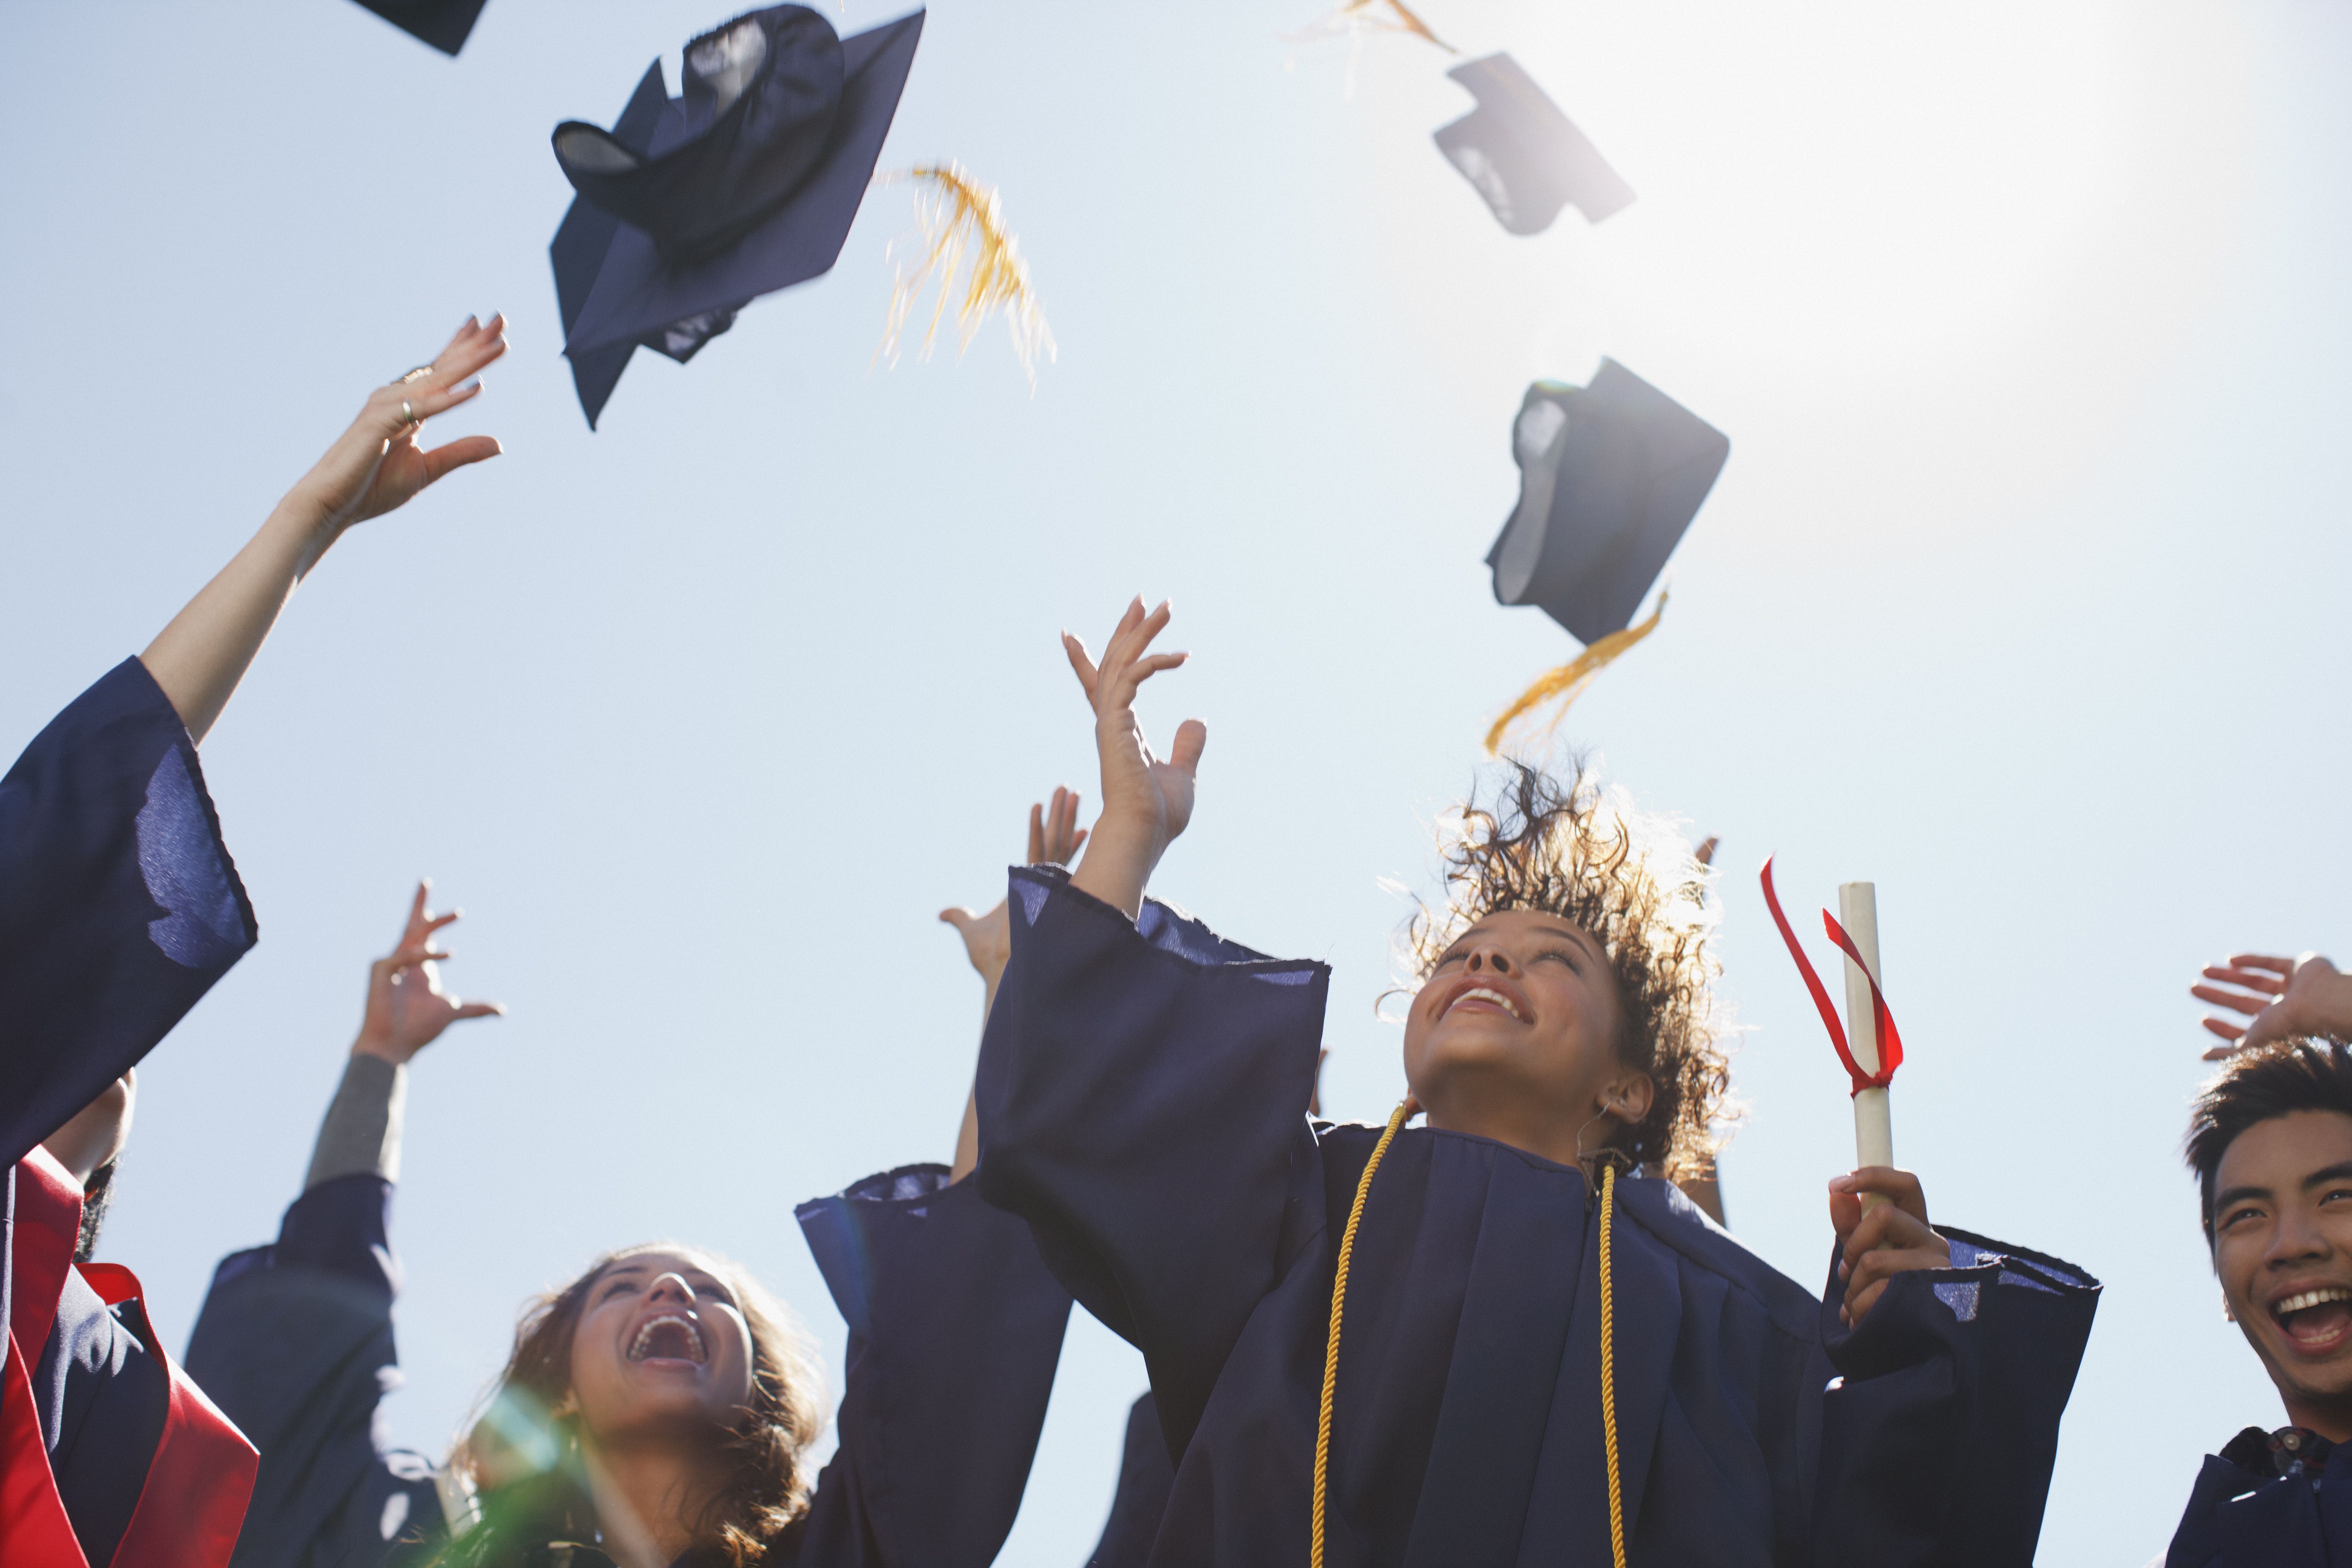 Tips And Ideas For A Graduation Party